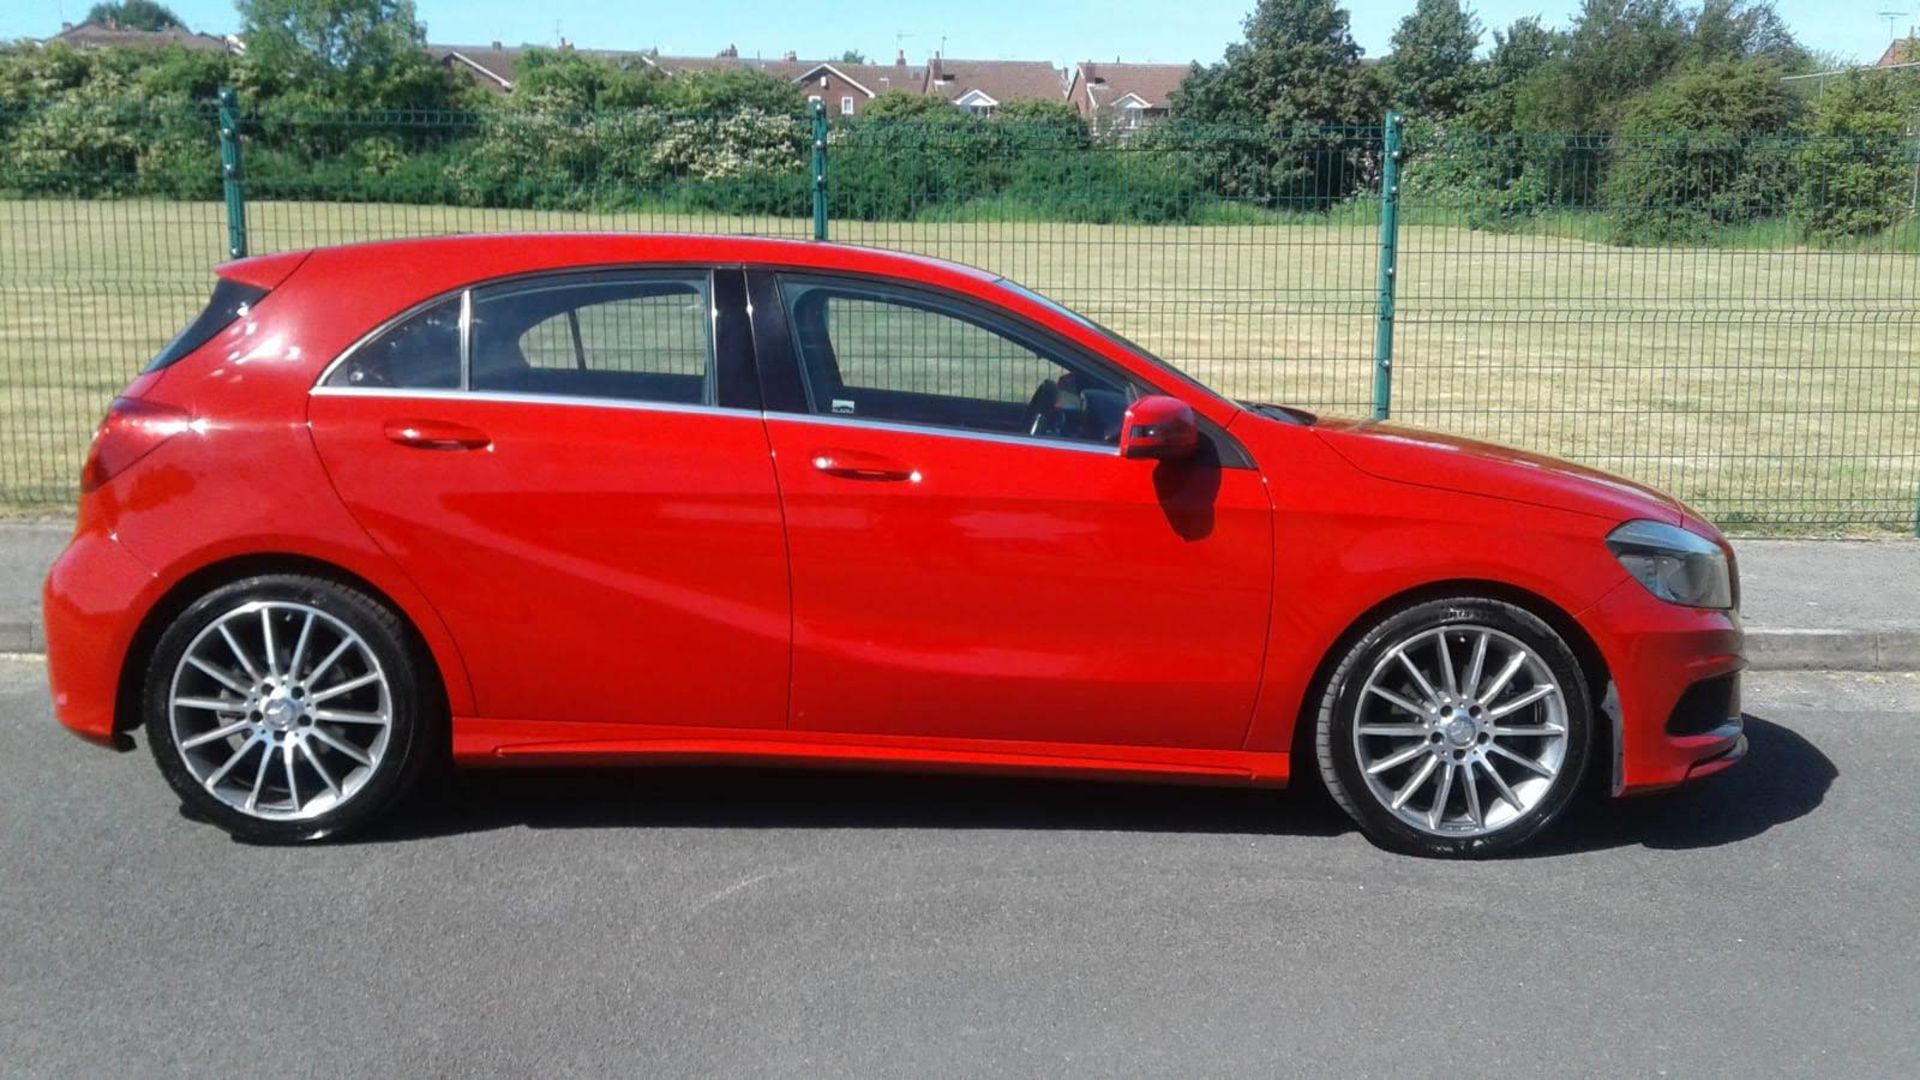 2015/15 REG MERCEDES-BENZ A180 BLUE EFFICIENCY AMG SPORT CDI 1.5 DIESEL, SHOWING 0 FORMER KEEPERS - Image 5 of 15